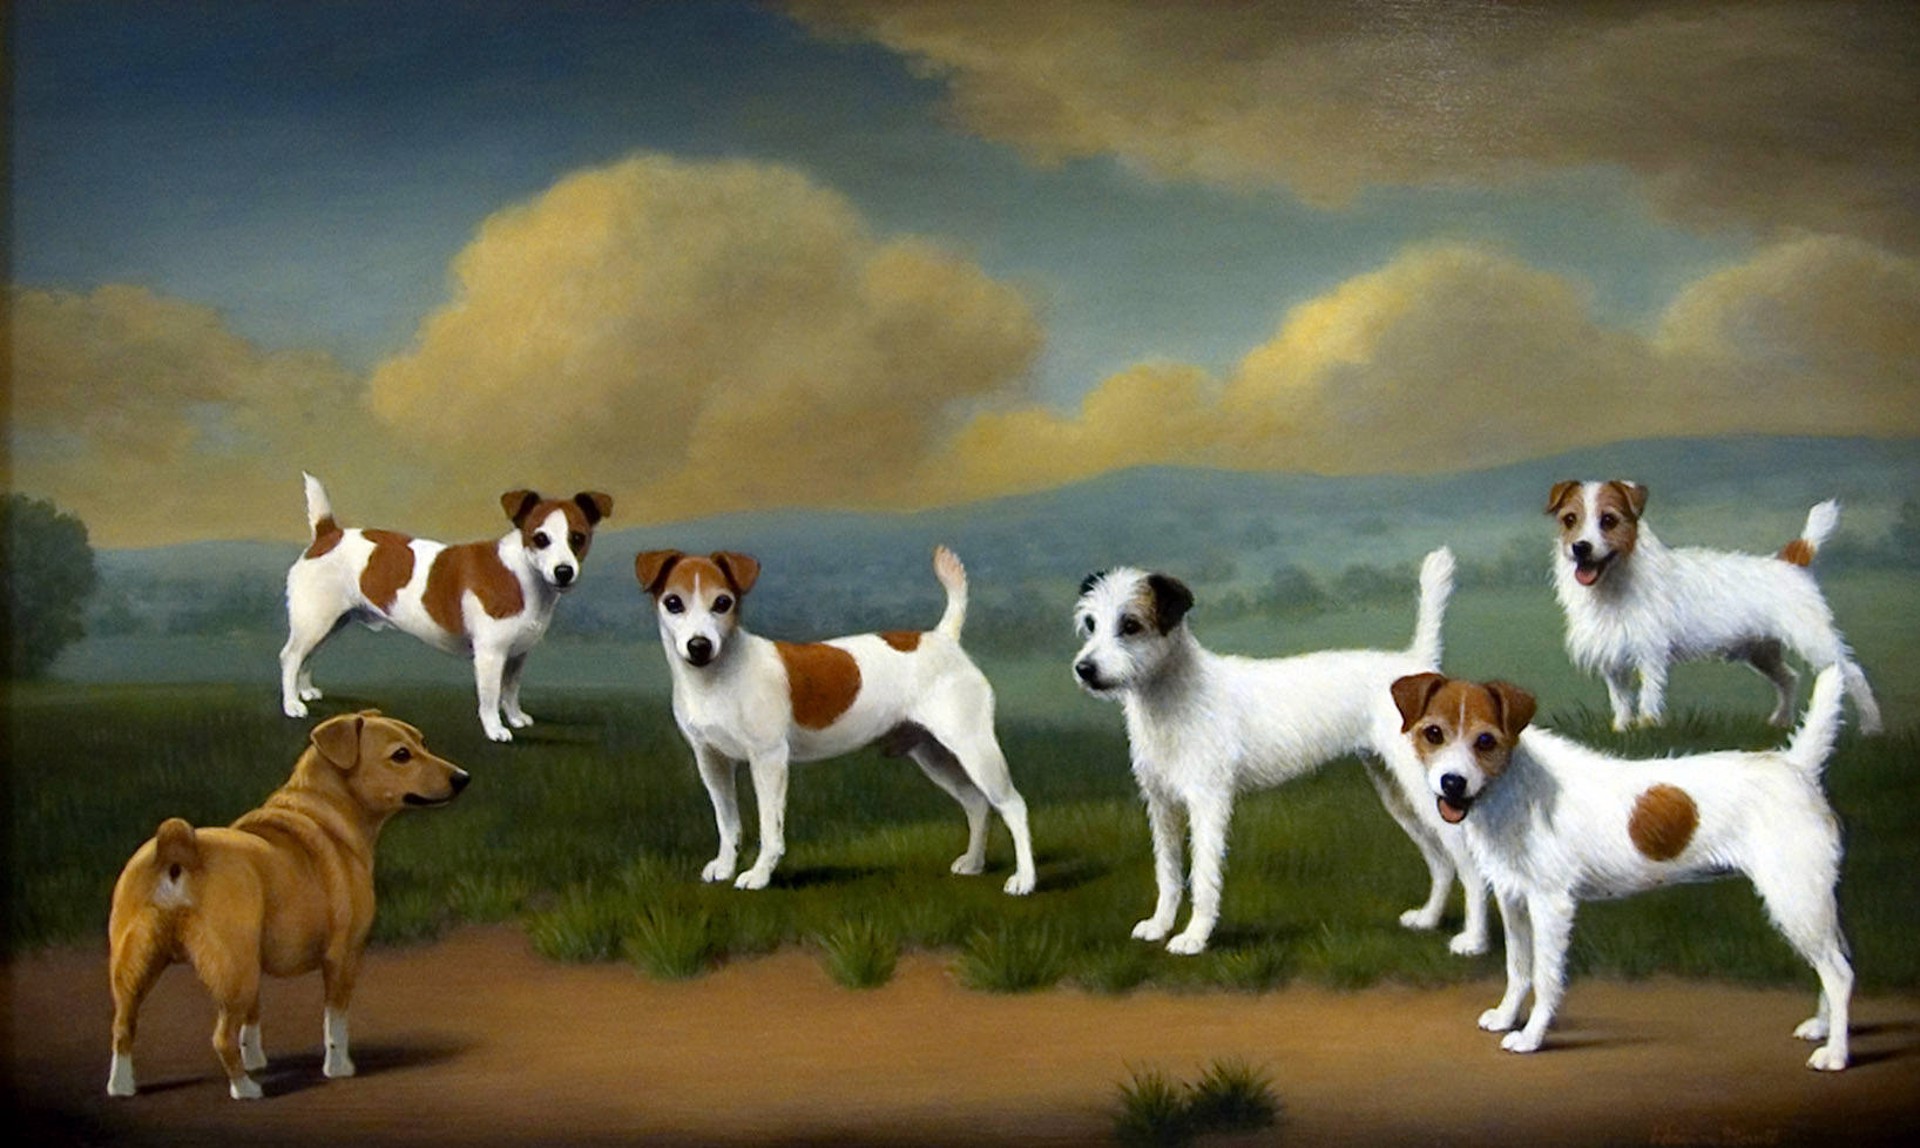 Parson Russell Terriers and One Jack Daniels, 2006 by Christine Merrill